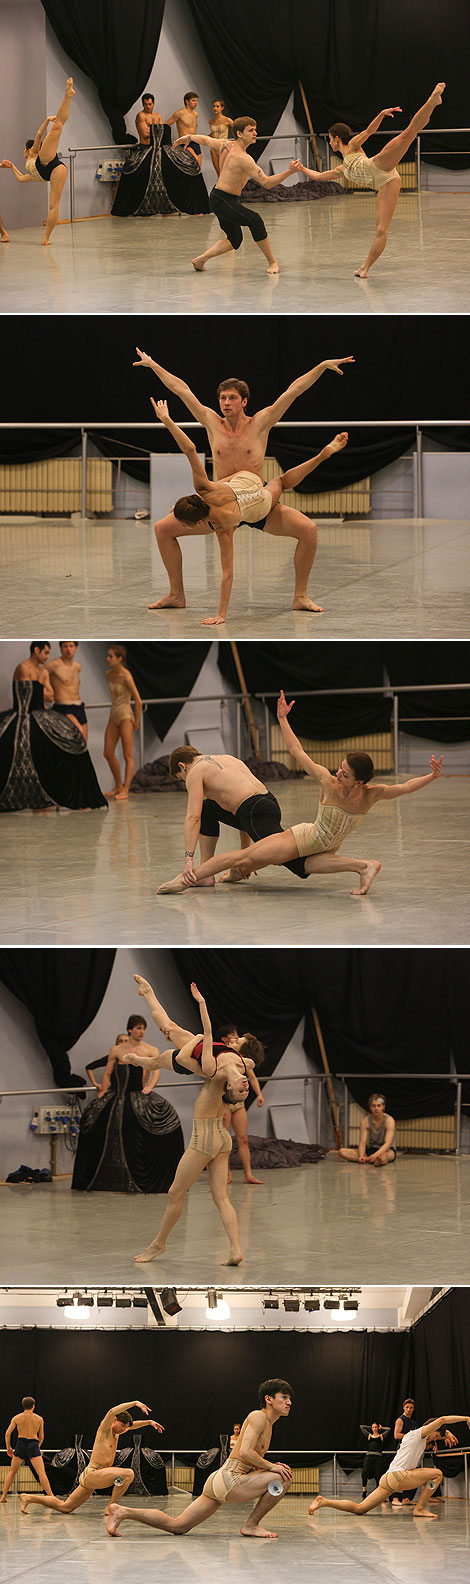 Rehearsals of the ballet La Petite Mort at the Bolshoi theater of Belarus